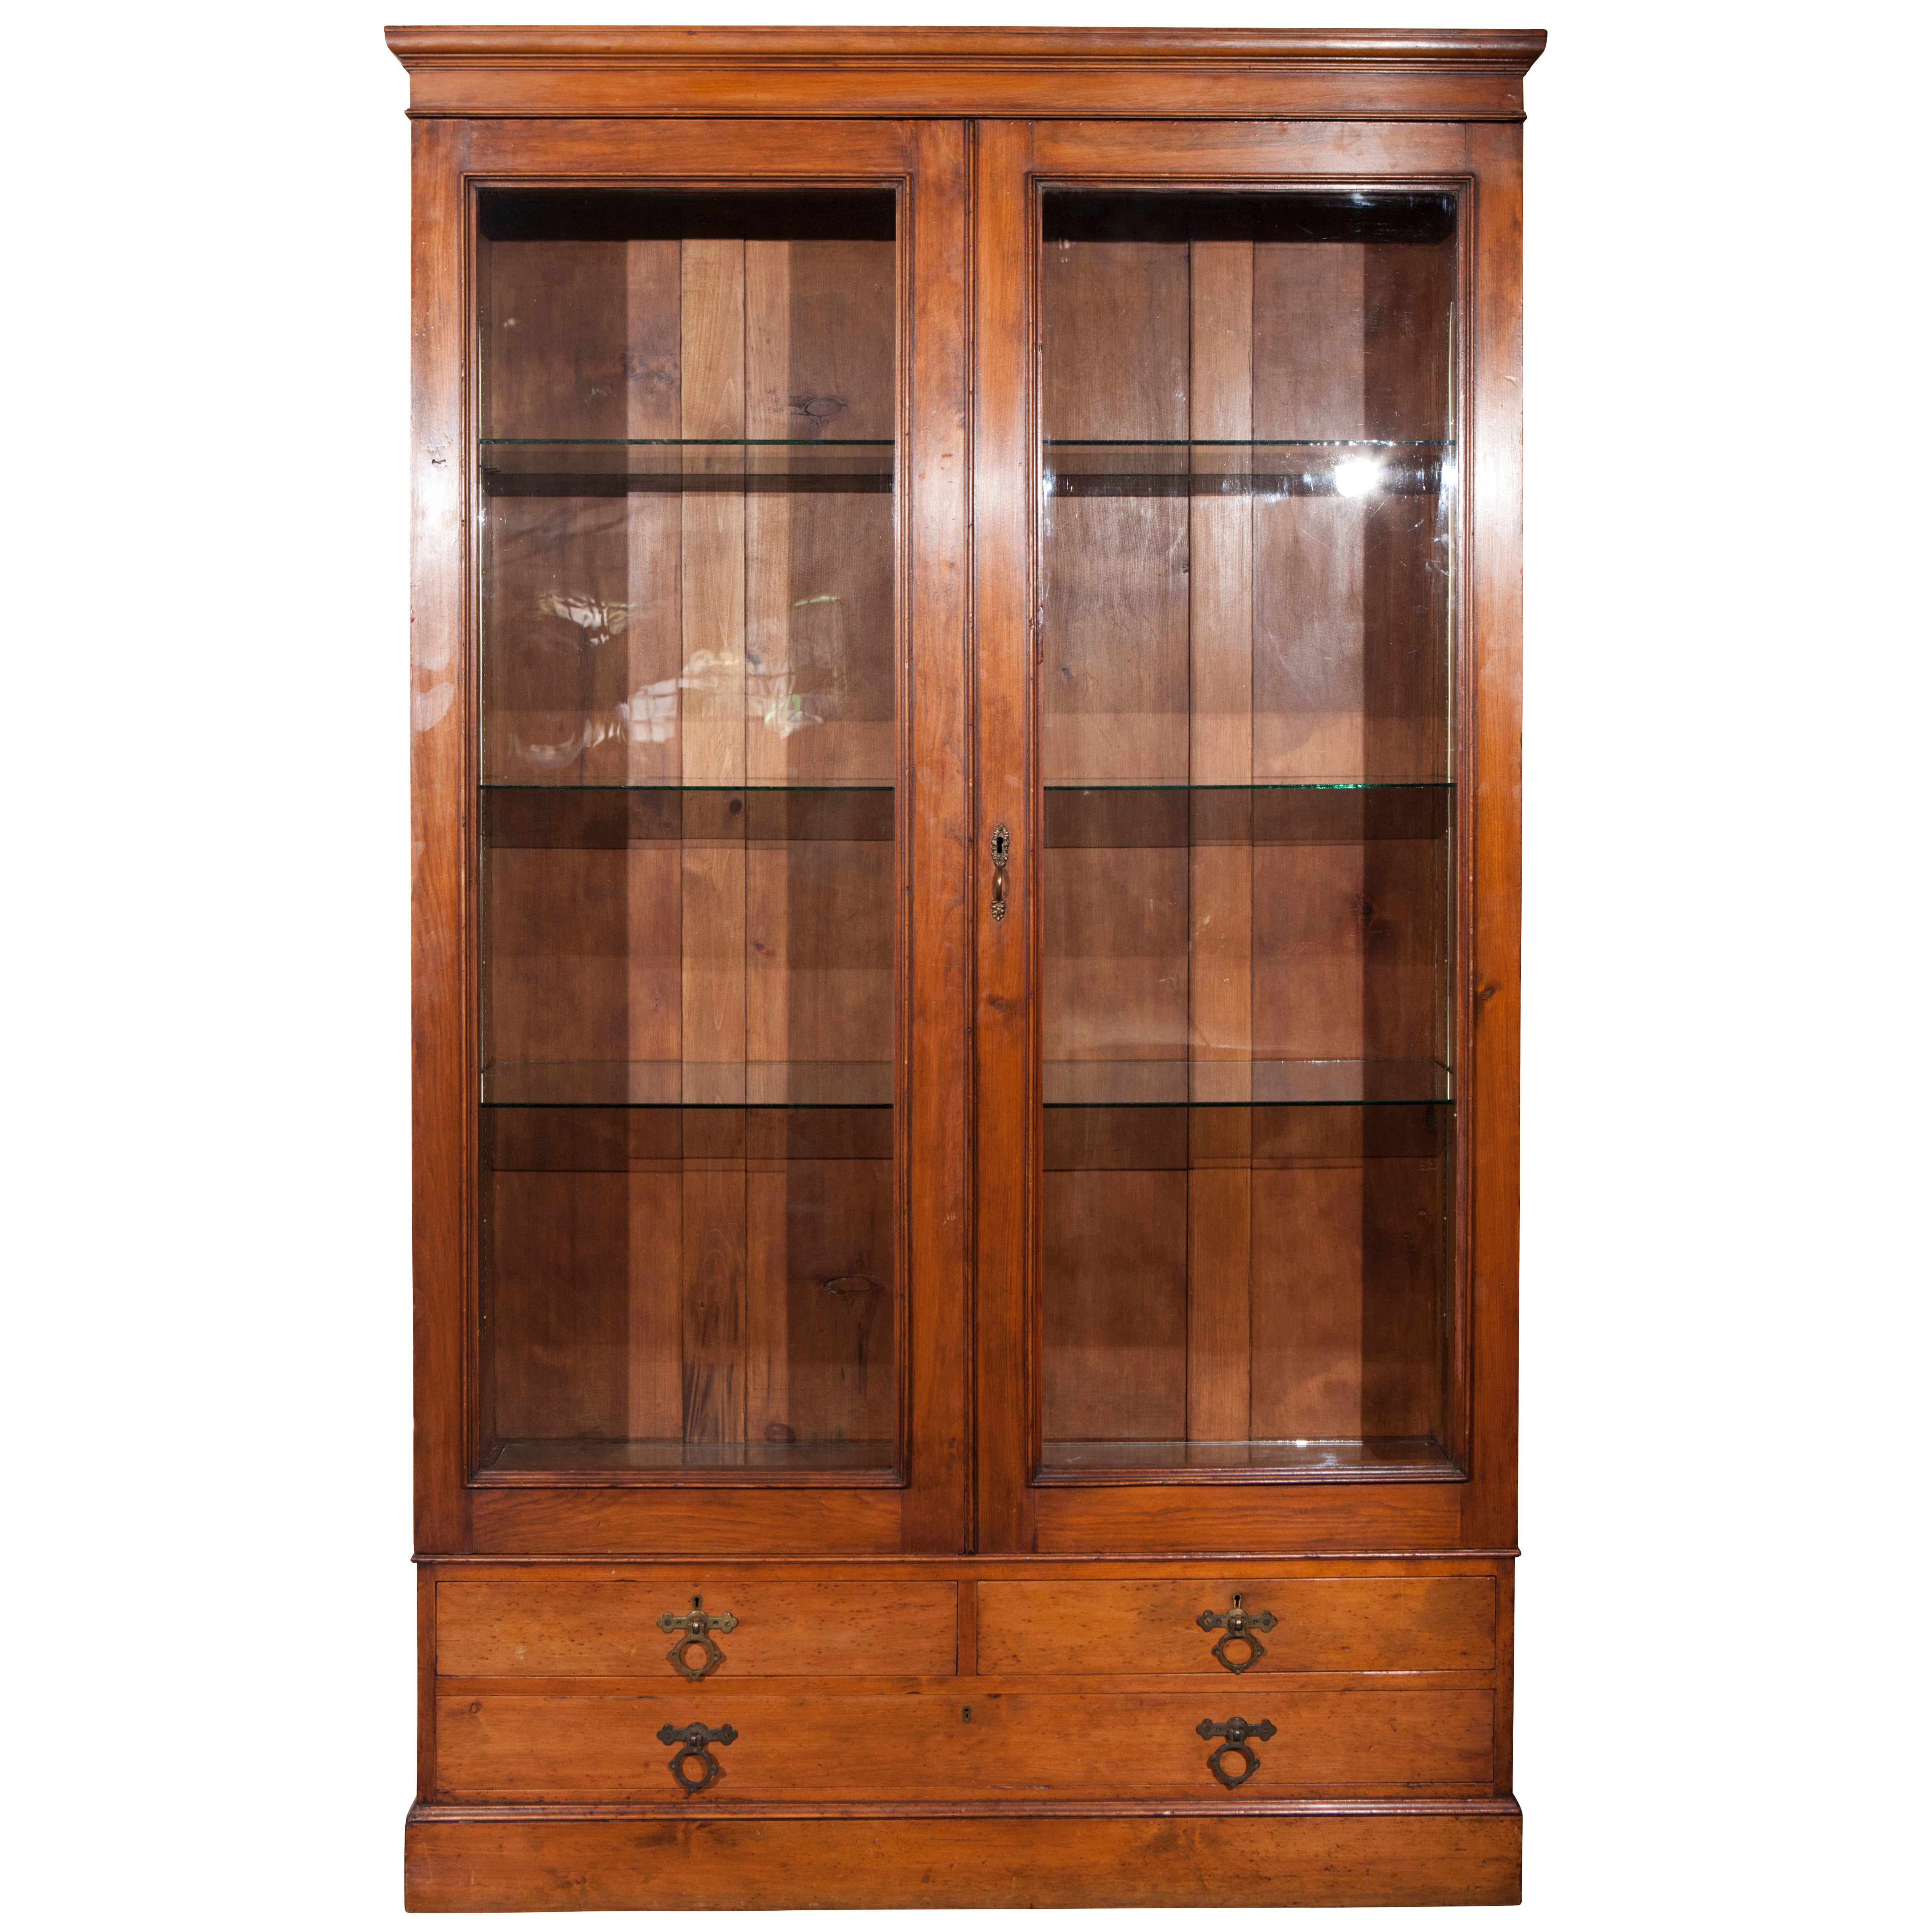 19th Century English Cabinet with Glass Doors